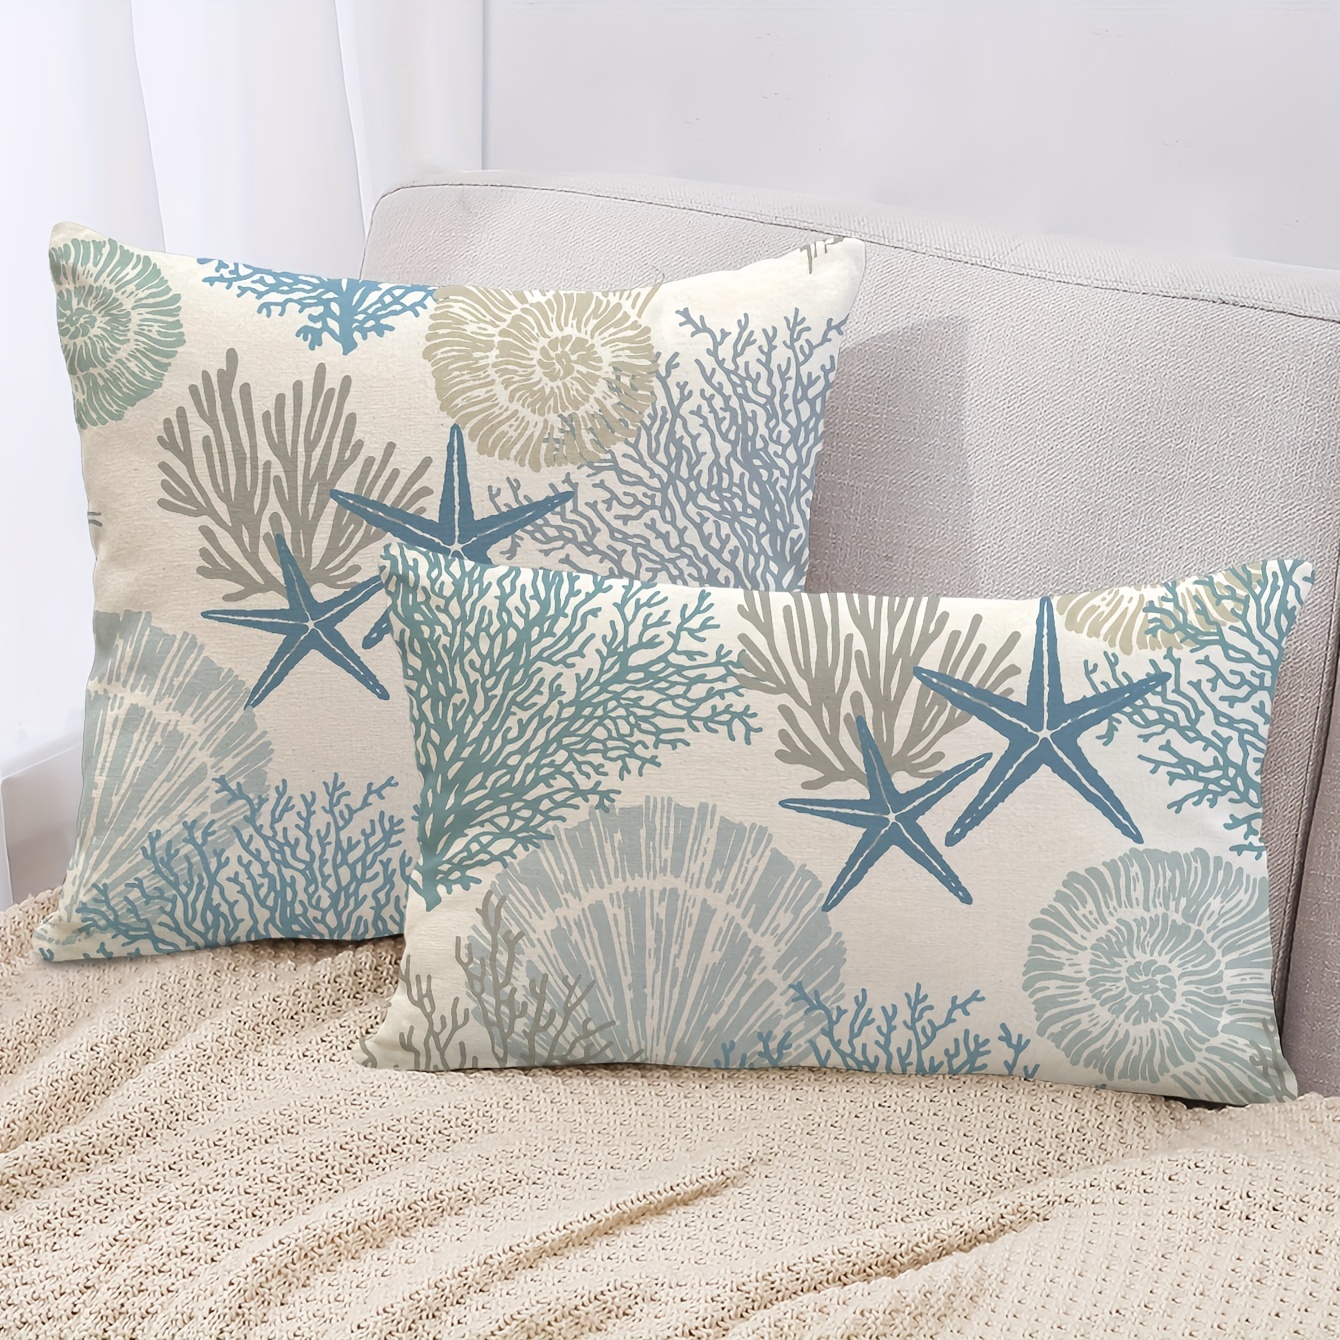 

1pc, Ocean Starfish Throw Pillow Cover, Summer Sea Cushion Case Decoration For Sofa Couch,without Pillow Insert